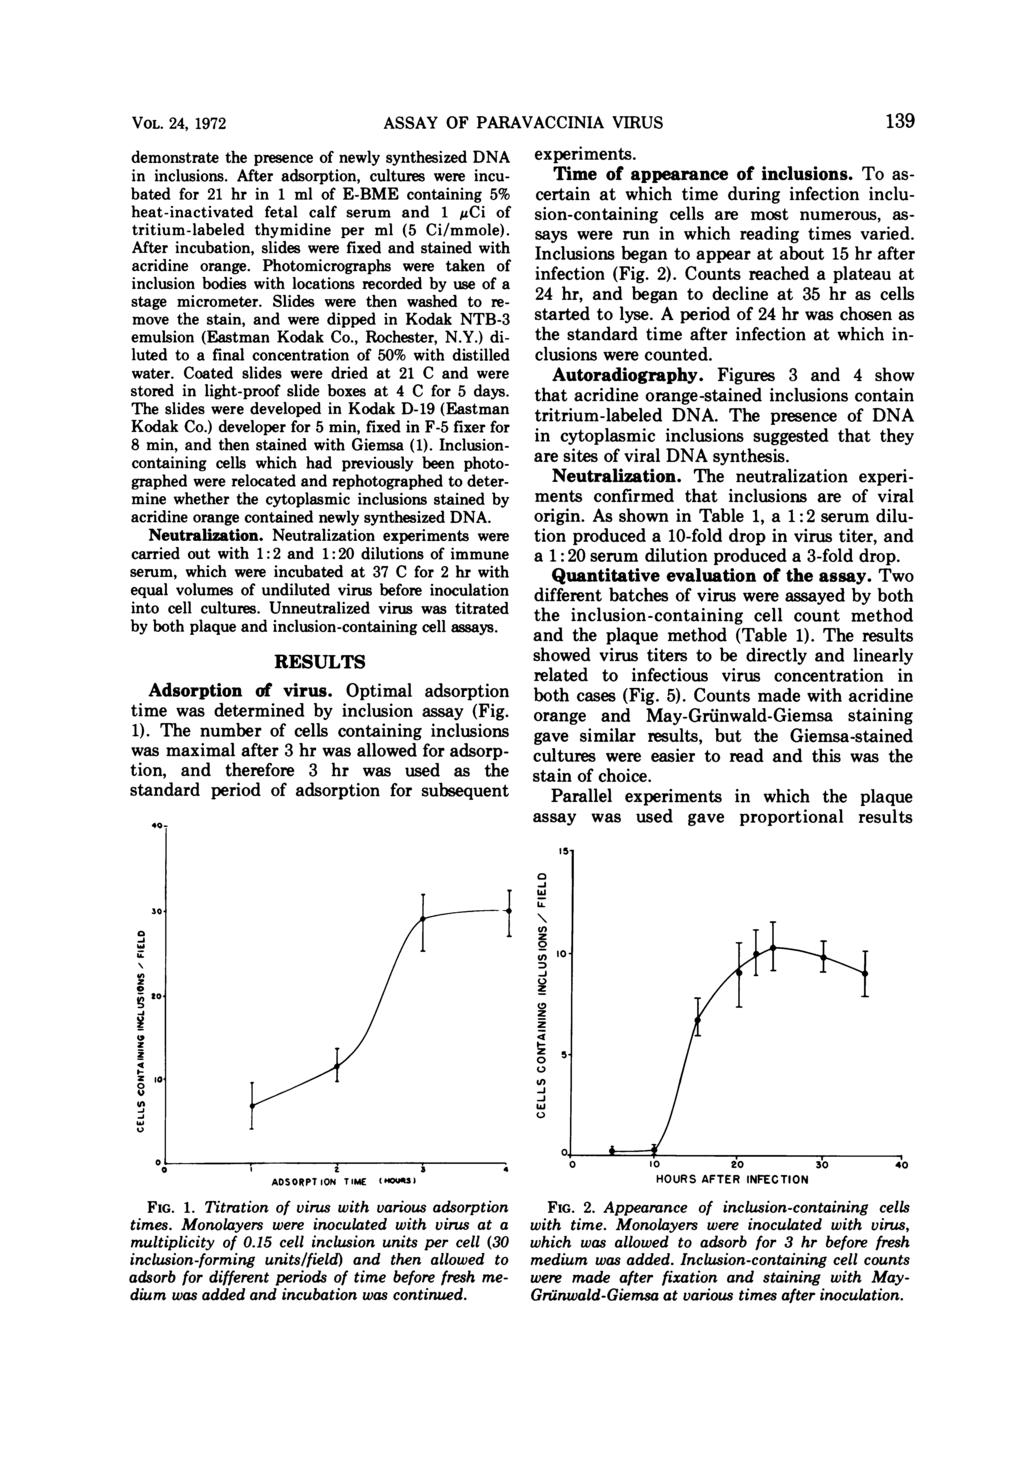 VOL. 24, 1972 ASSAY OF PARAVACCINIA VIRUS demonstrate the presence of newly synthesized DNA in inclusions.